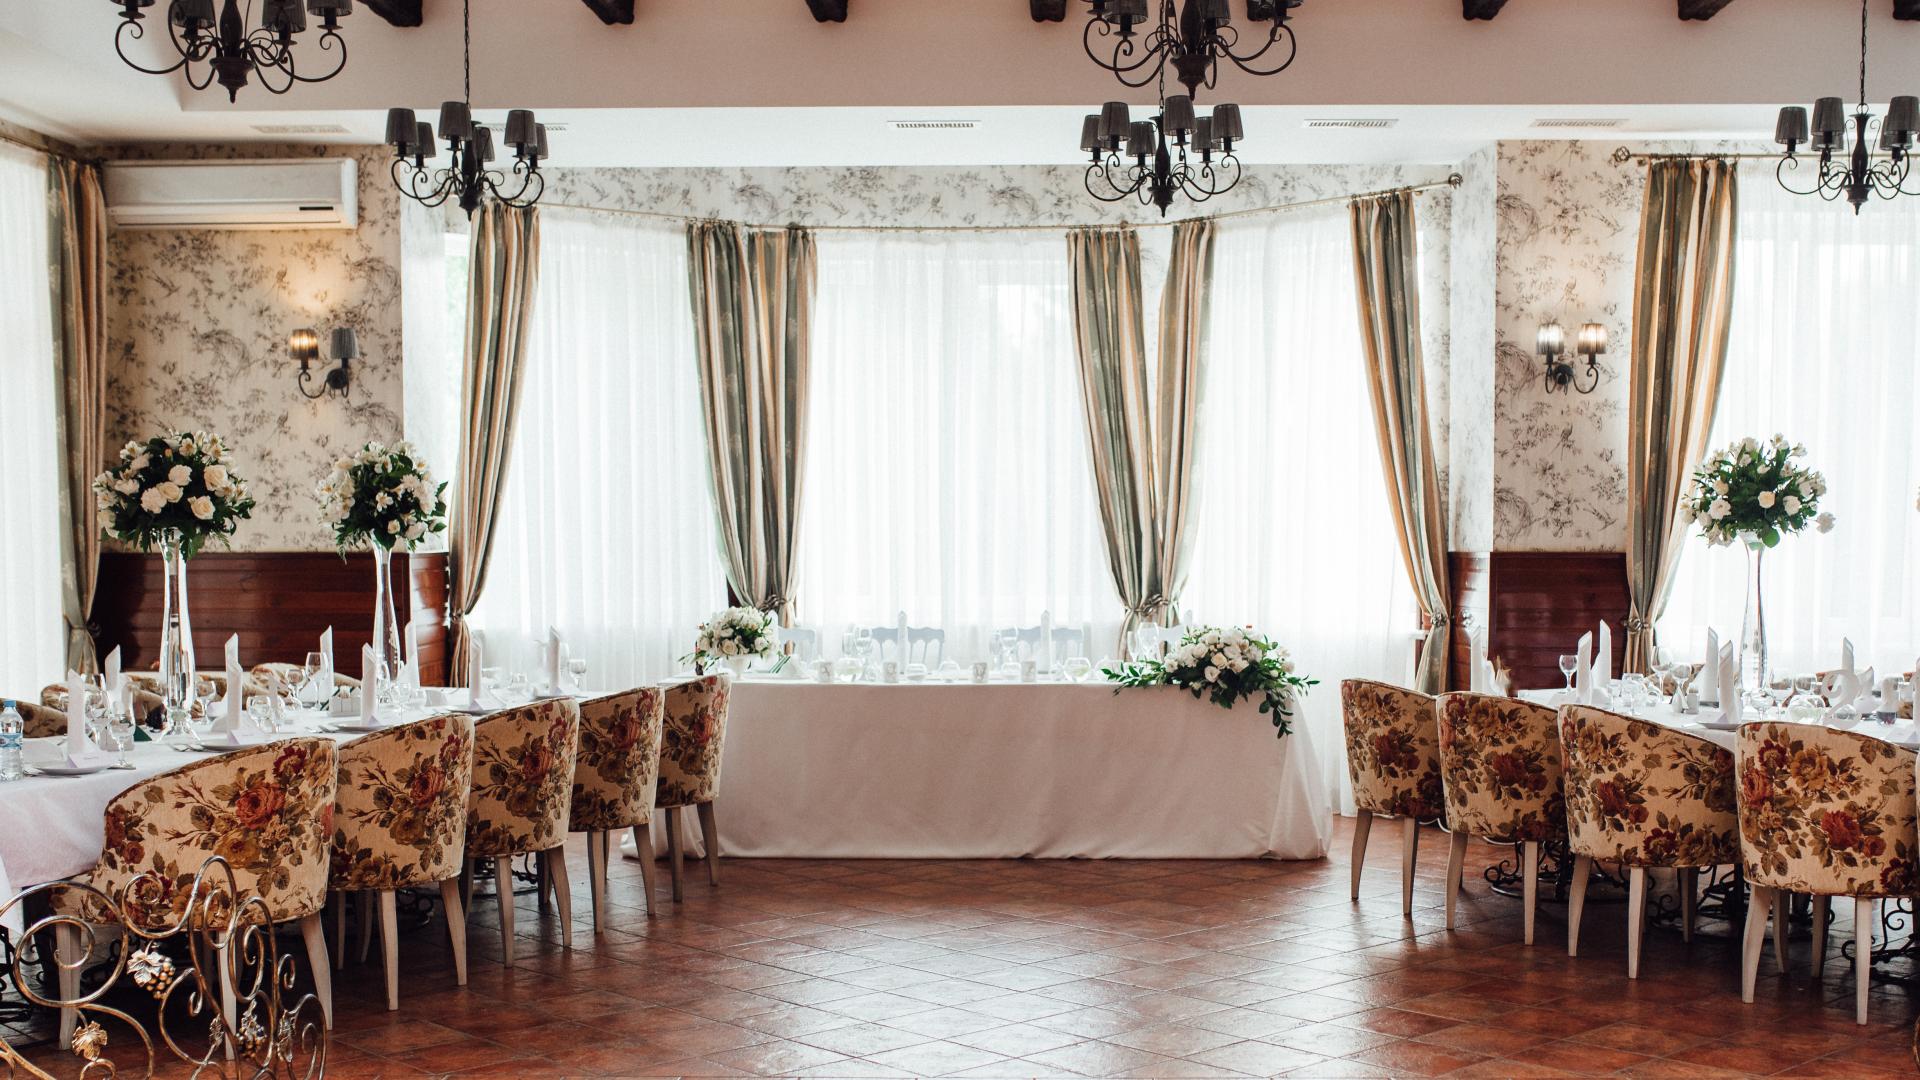 Small Hotel Wedding Venues for Rent in New York City, NY